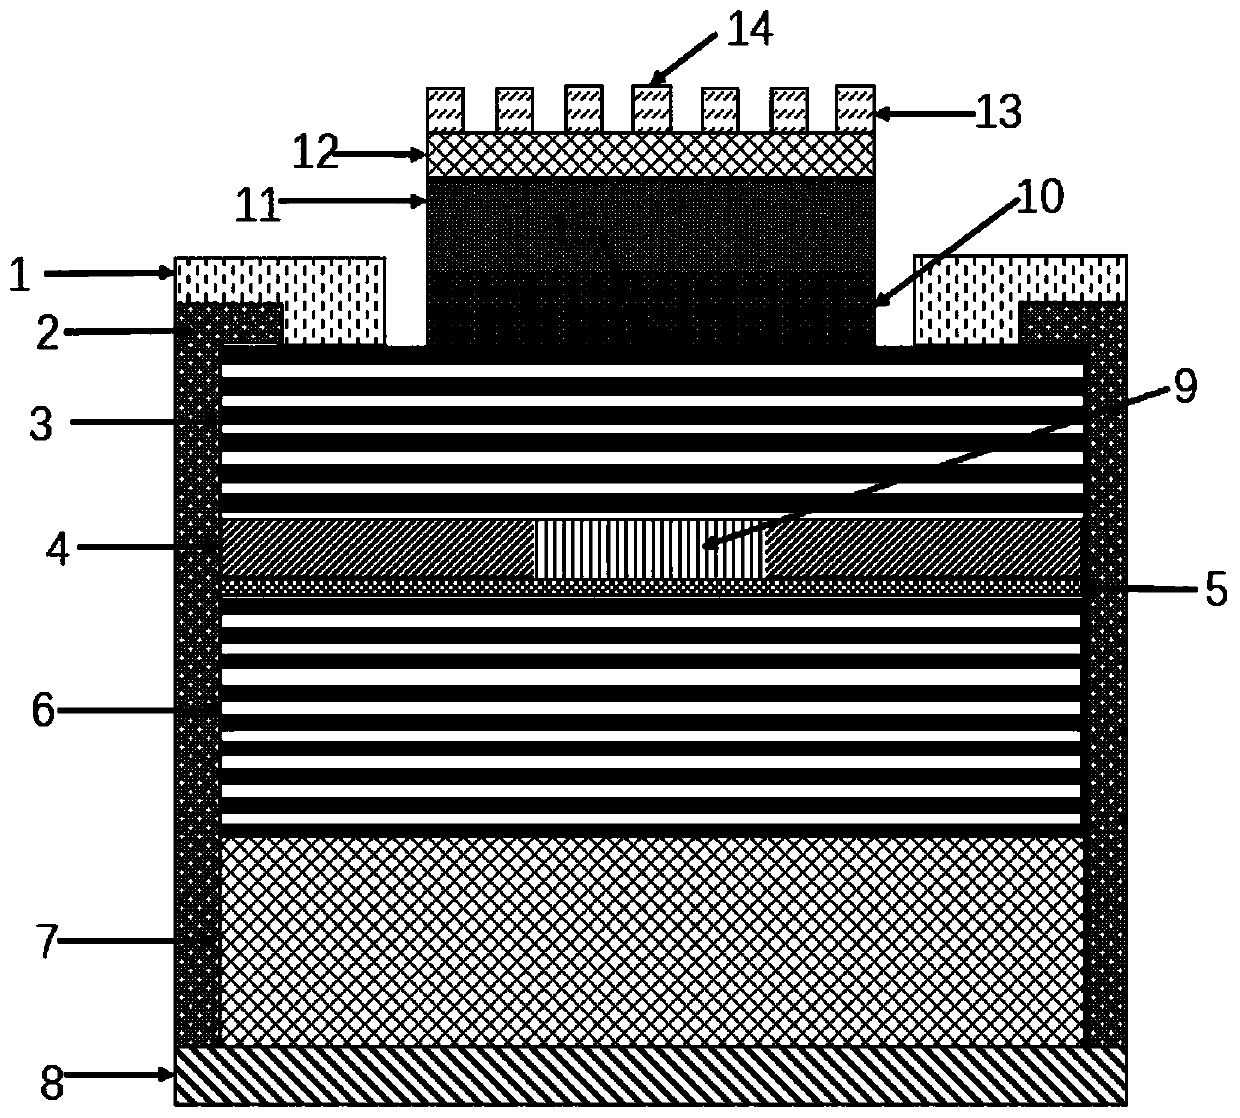 Epitaxy-integrated high-contrast grating external-cavity surface-emitting laser